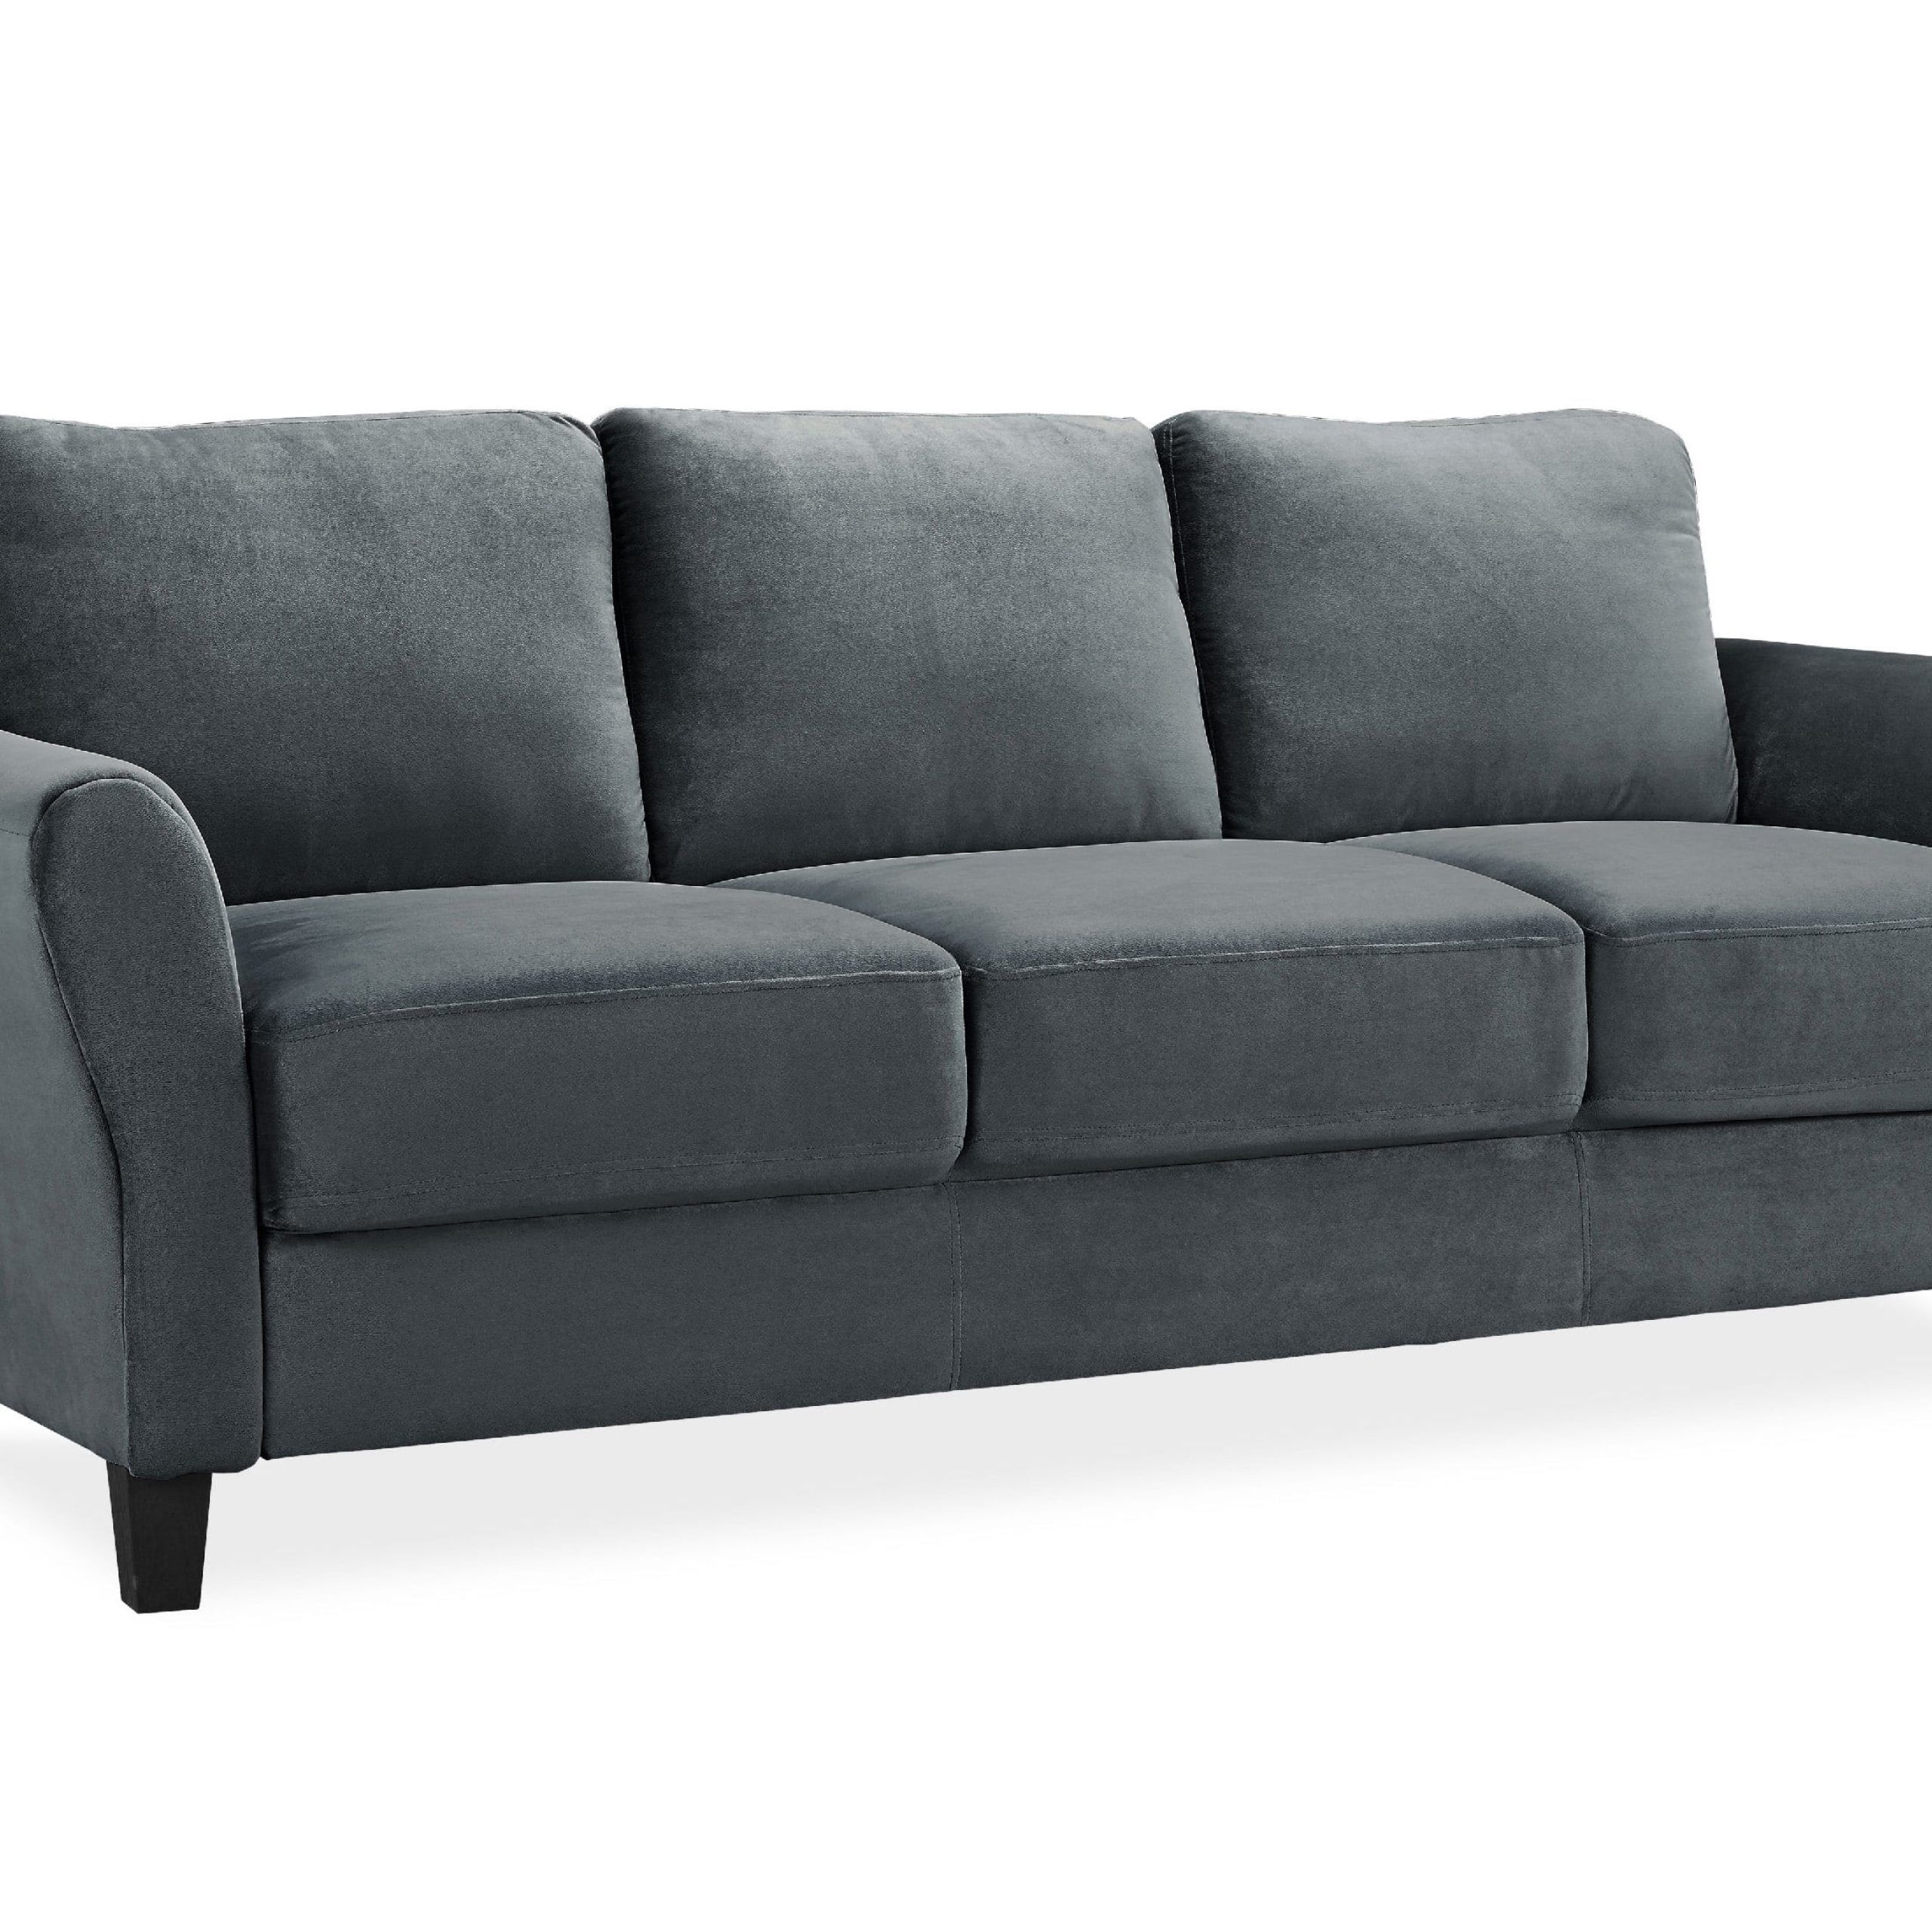 Lifestyle Solutions Alexa Sofa With Curved Arms, Gray Fabric – Walmart Intended For Sofas With Curved Arms (Photo 1 of 15)